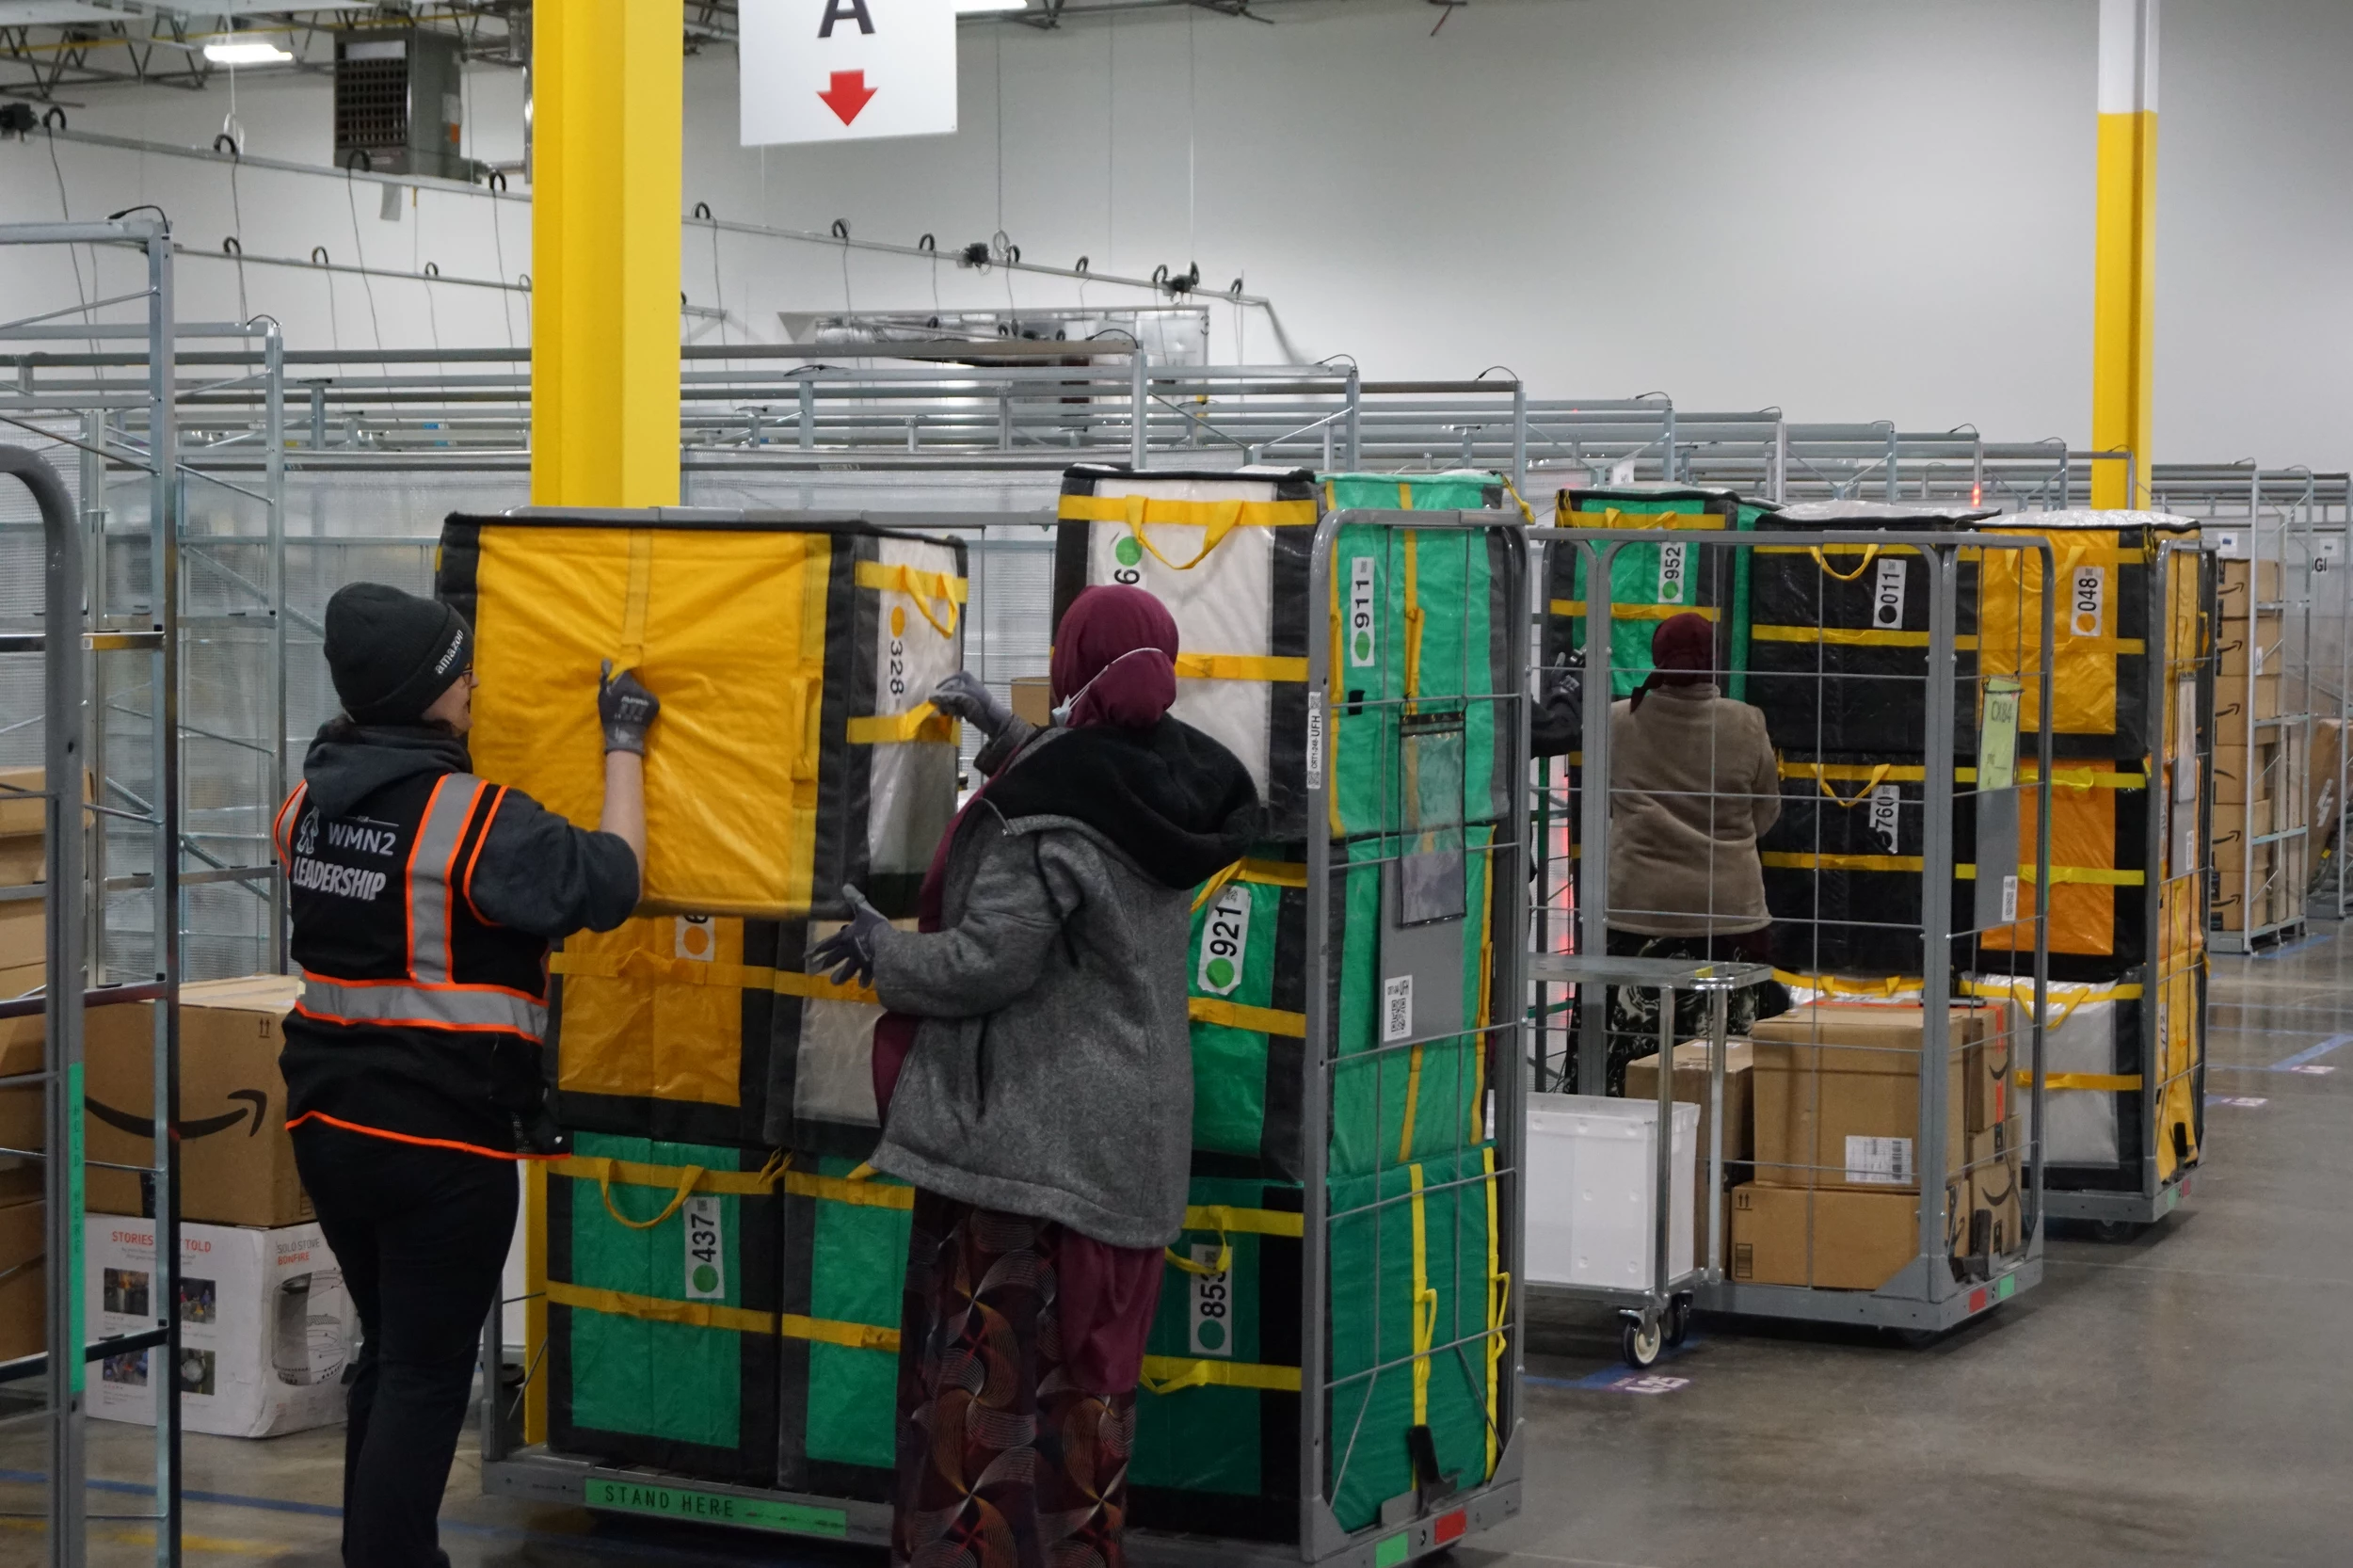 2.4-Million Packages Delivered From St. Cloud's Amazon Station